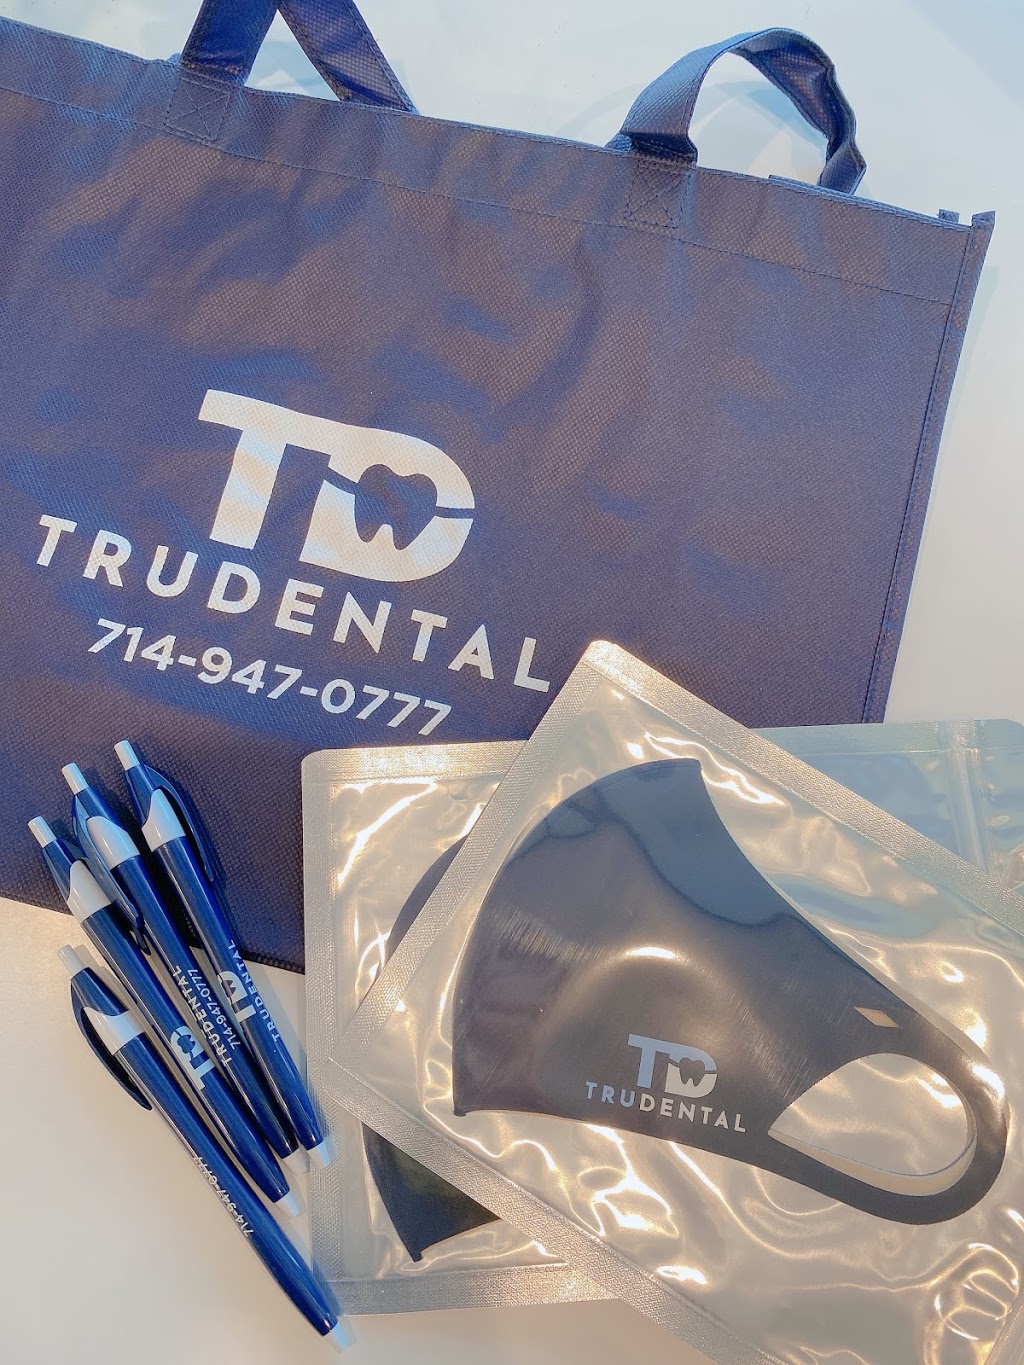 TruDental | 4917 Lincoln Ave, Cypress, CA 90630 | Phone: (714) 947-0777